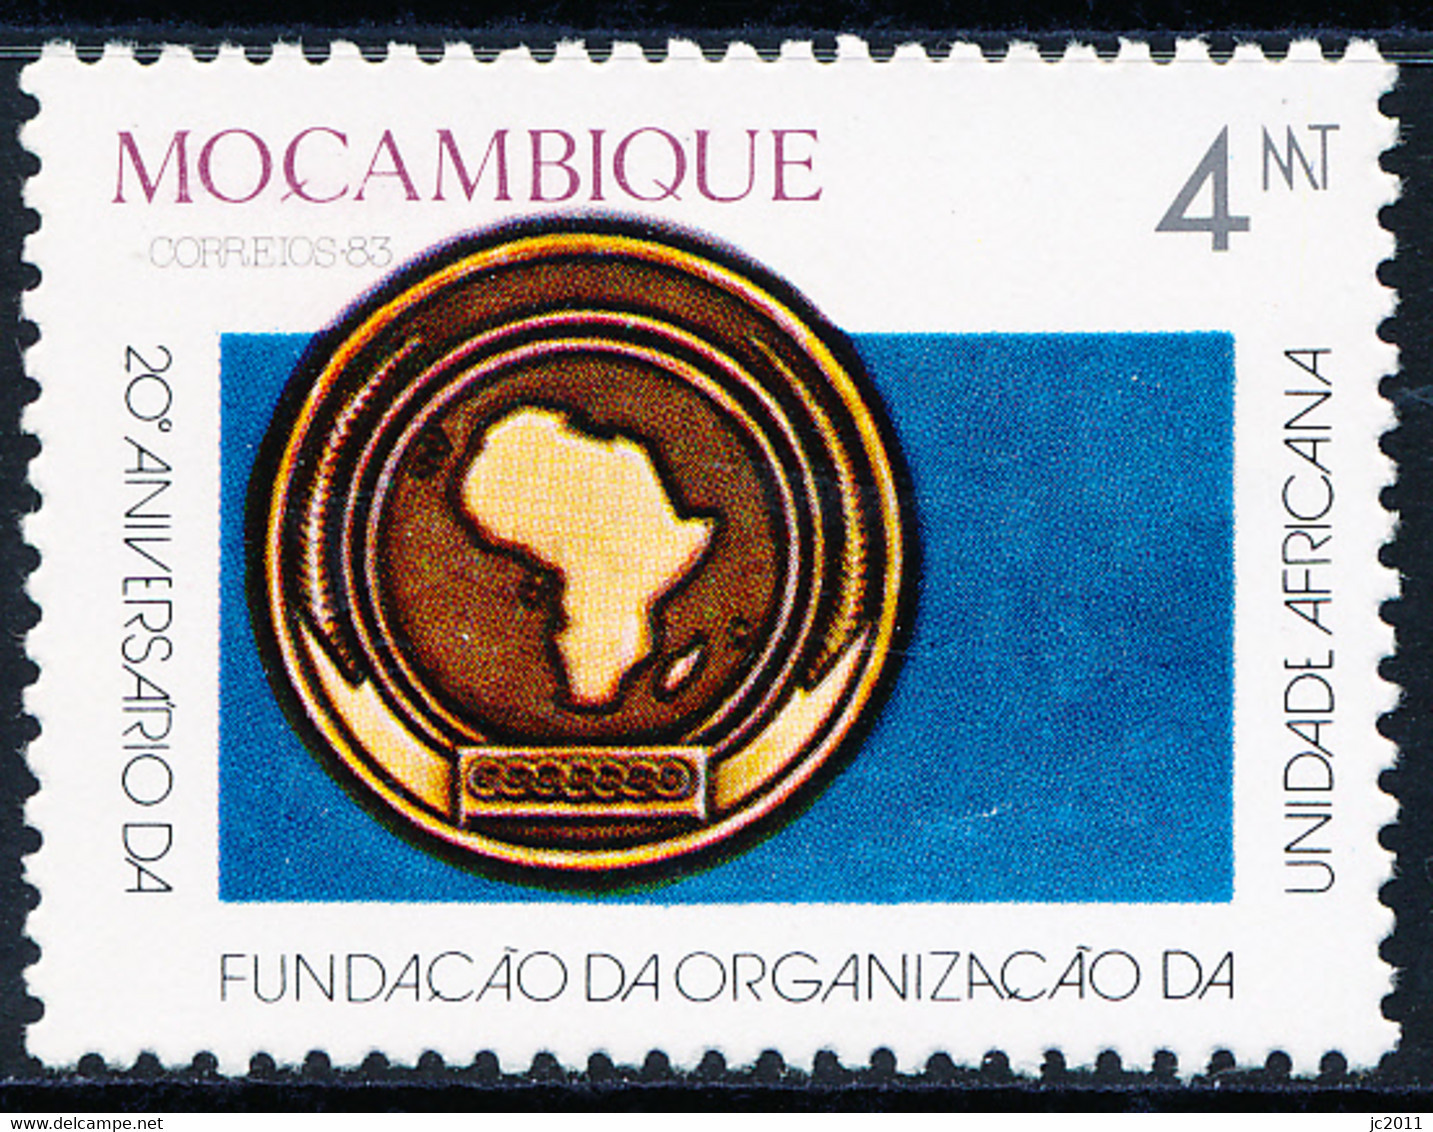 Mozambique - 1983 - Organization Of African Unity   - MNH - Mozambique